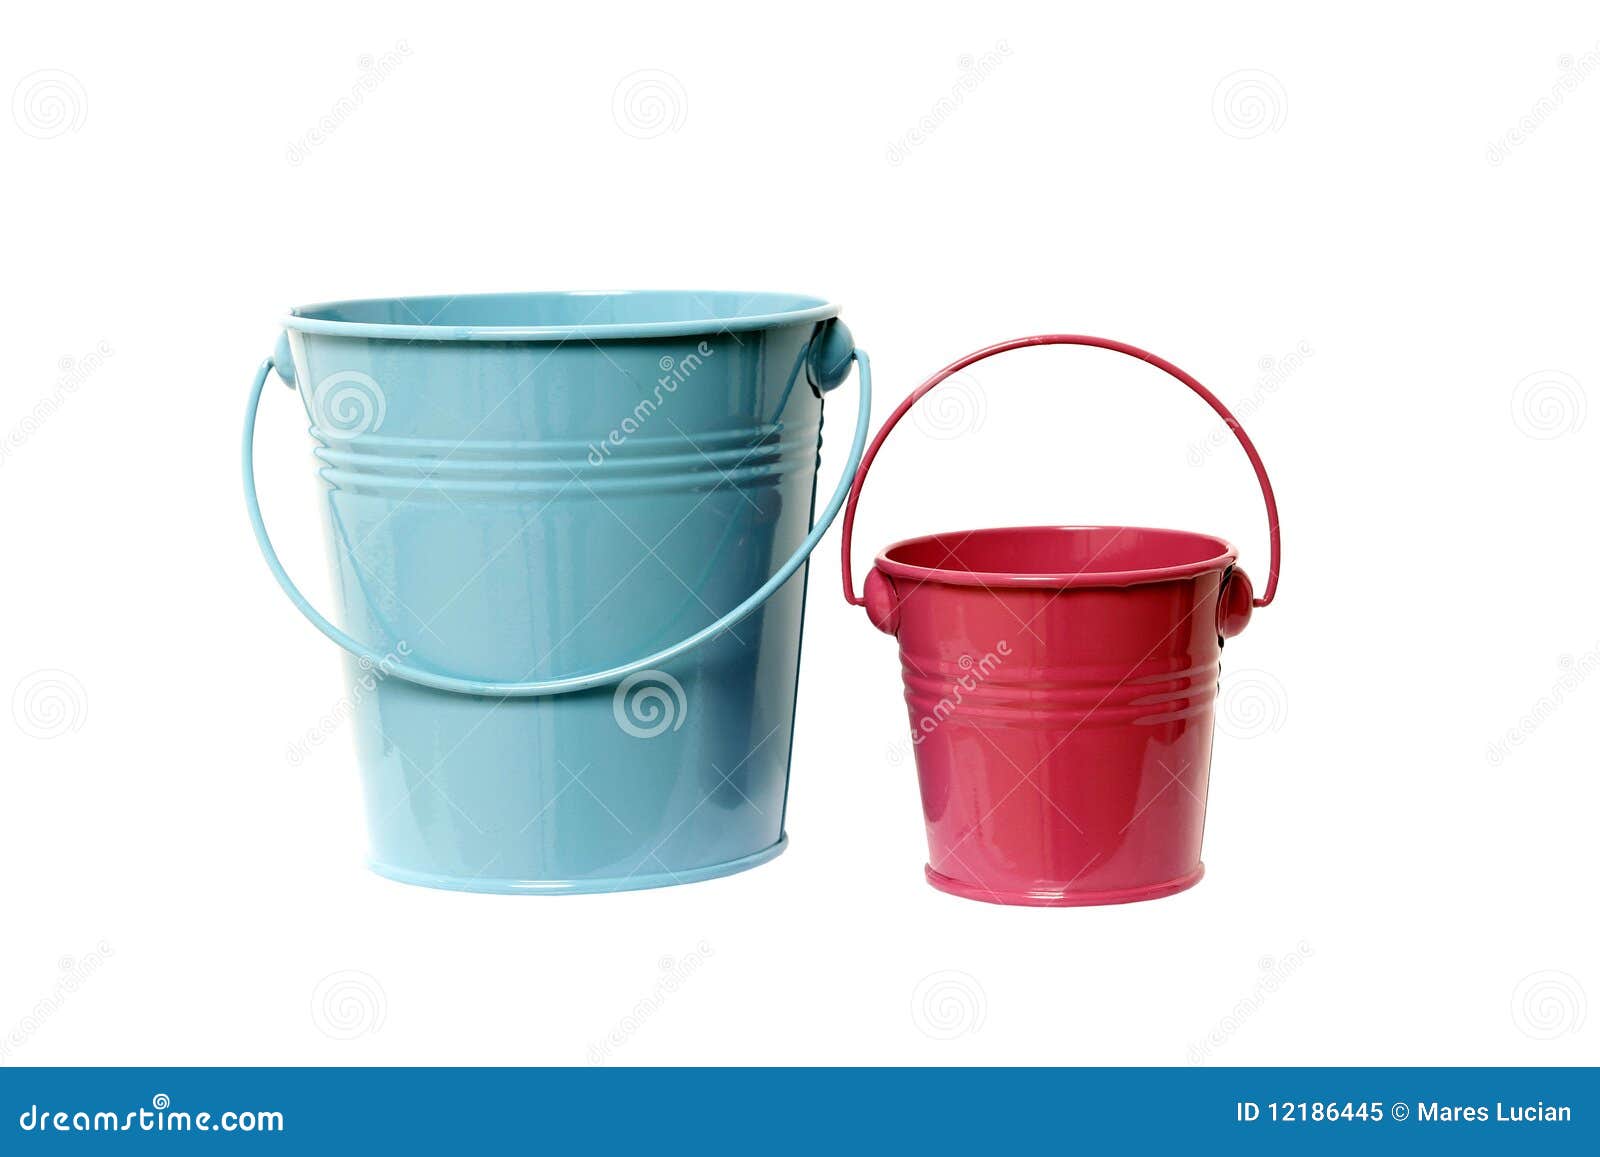 Three Different Colored Buckets With Handles Stock Photo